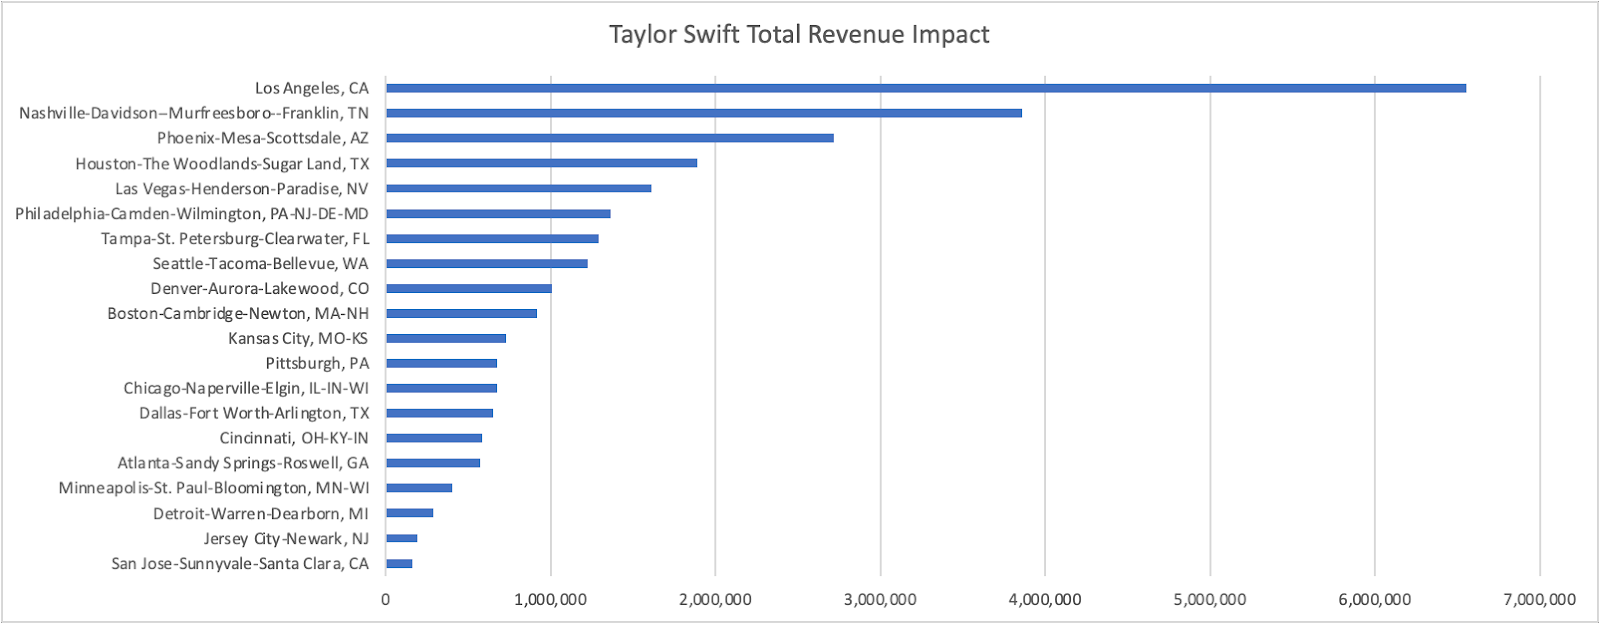 Graph showing taylor swift total revenue impact with Los Angeles being the highest and San Jose - Sunnyvale - Santa Clara being the lowest from AirDNA